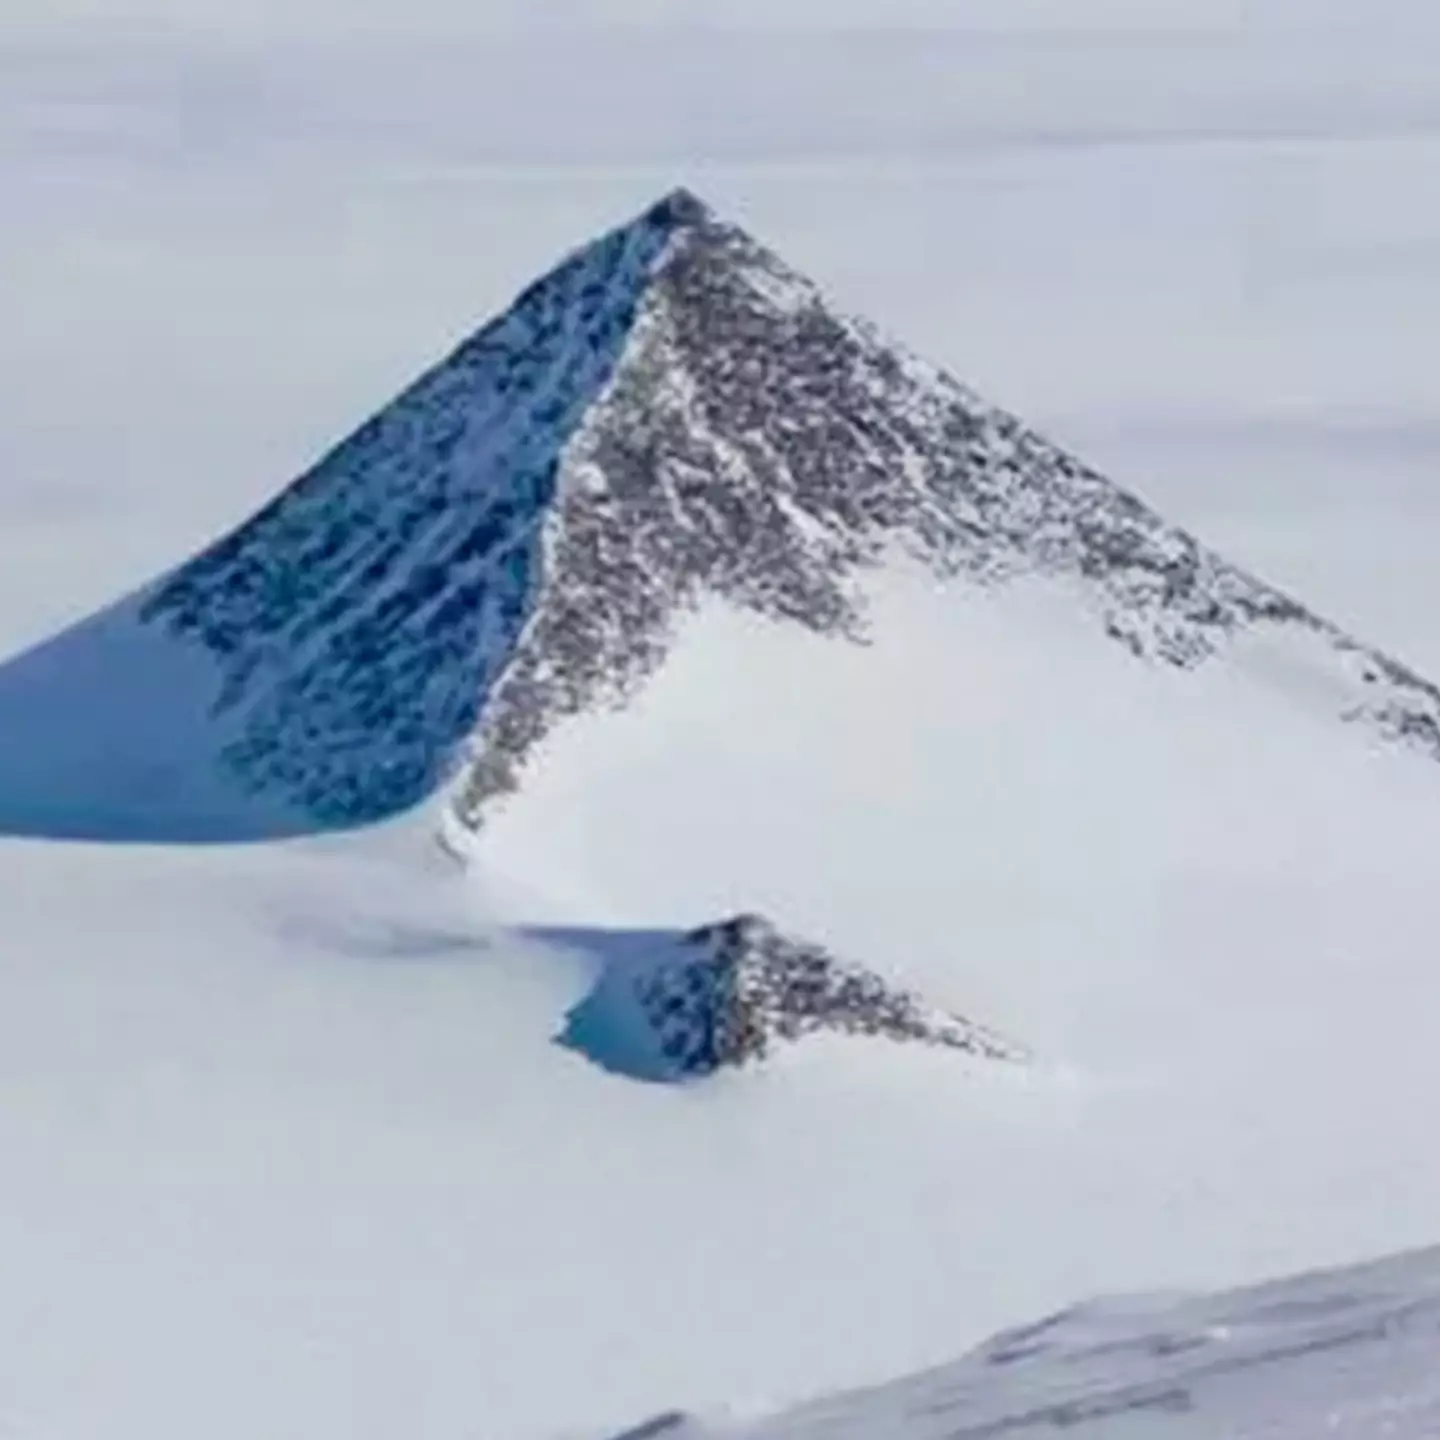 The truth behind mysterious 'pyramid' discovered in Antarctica